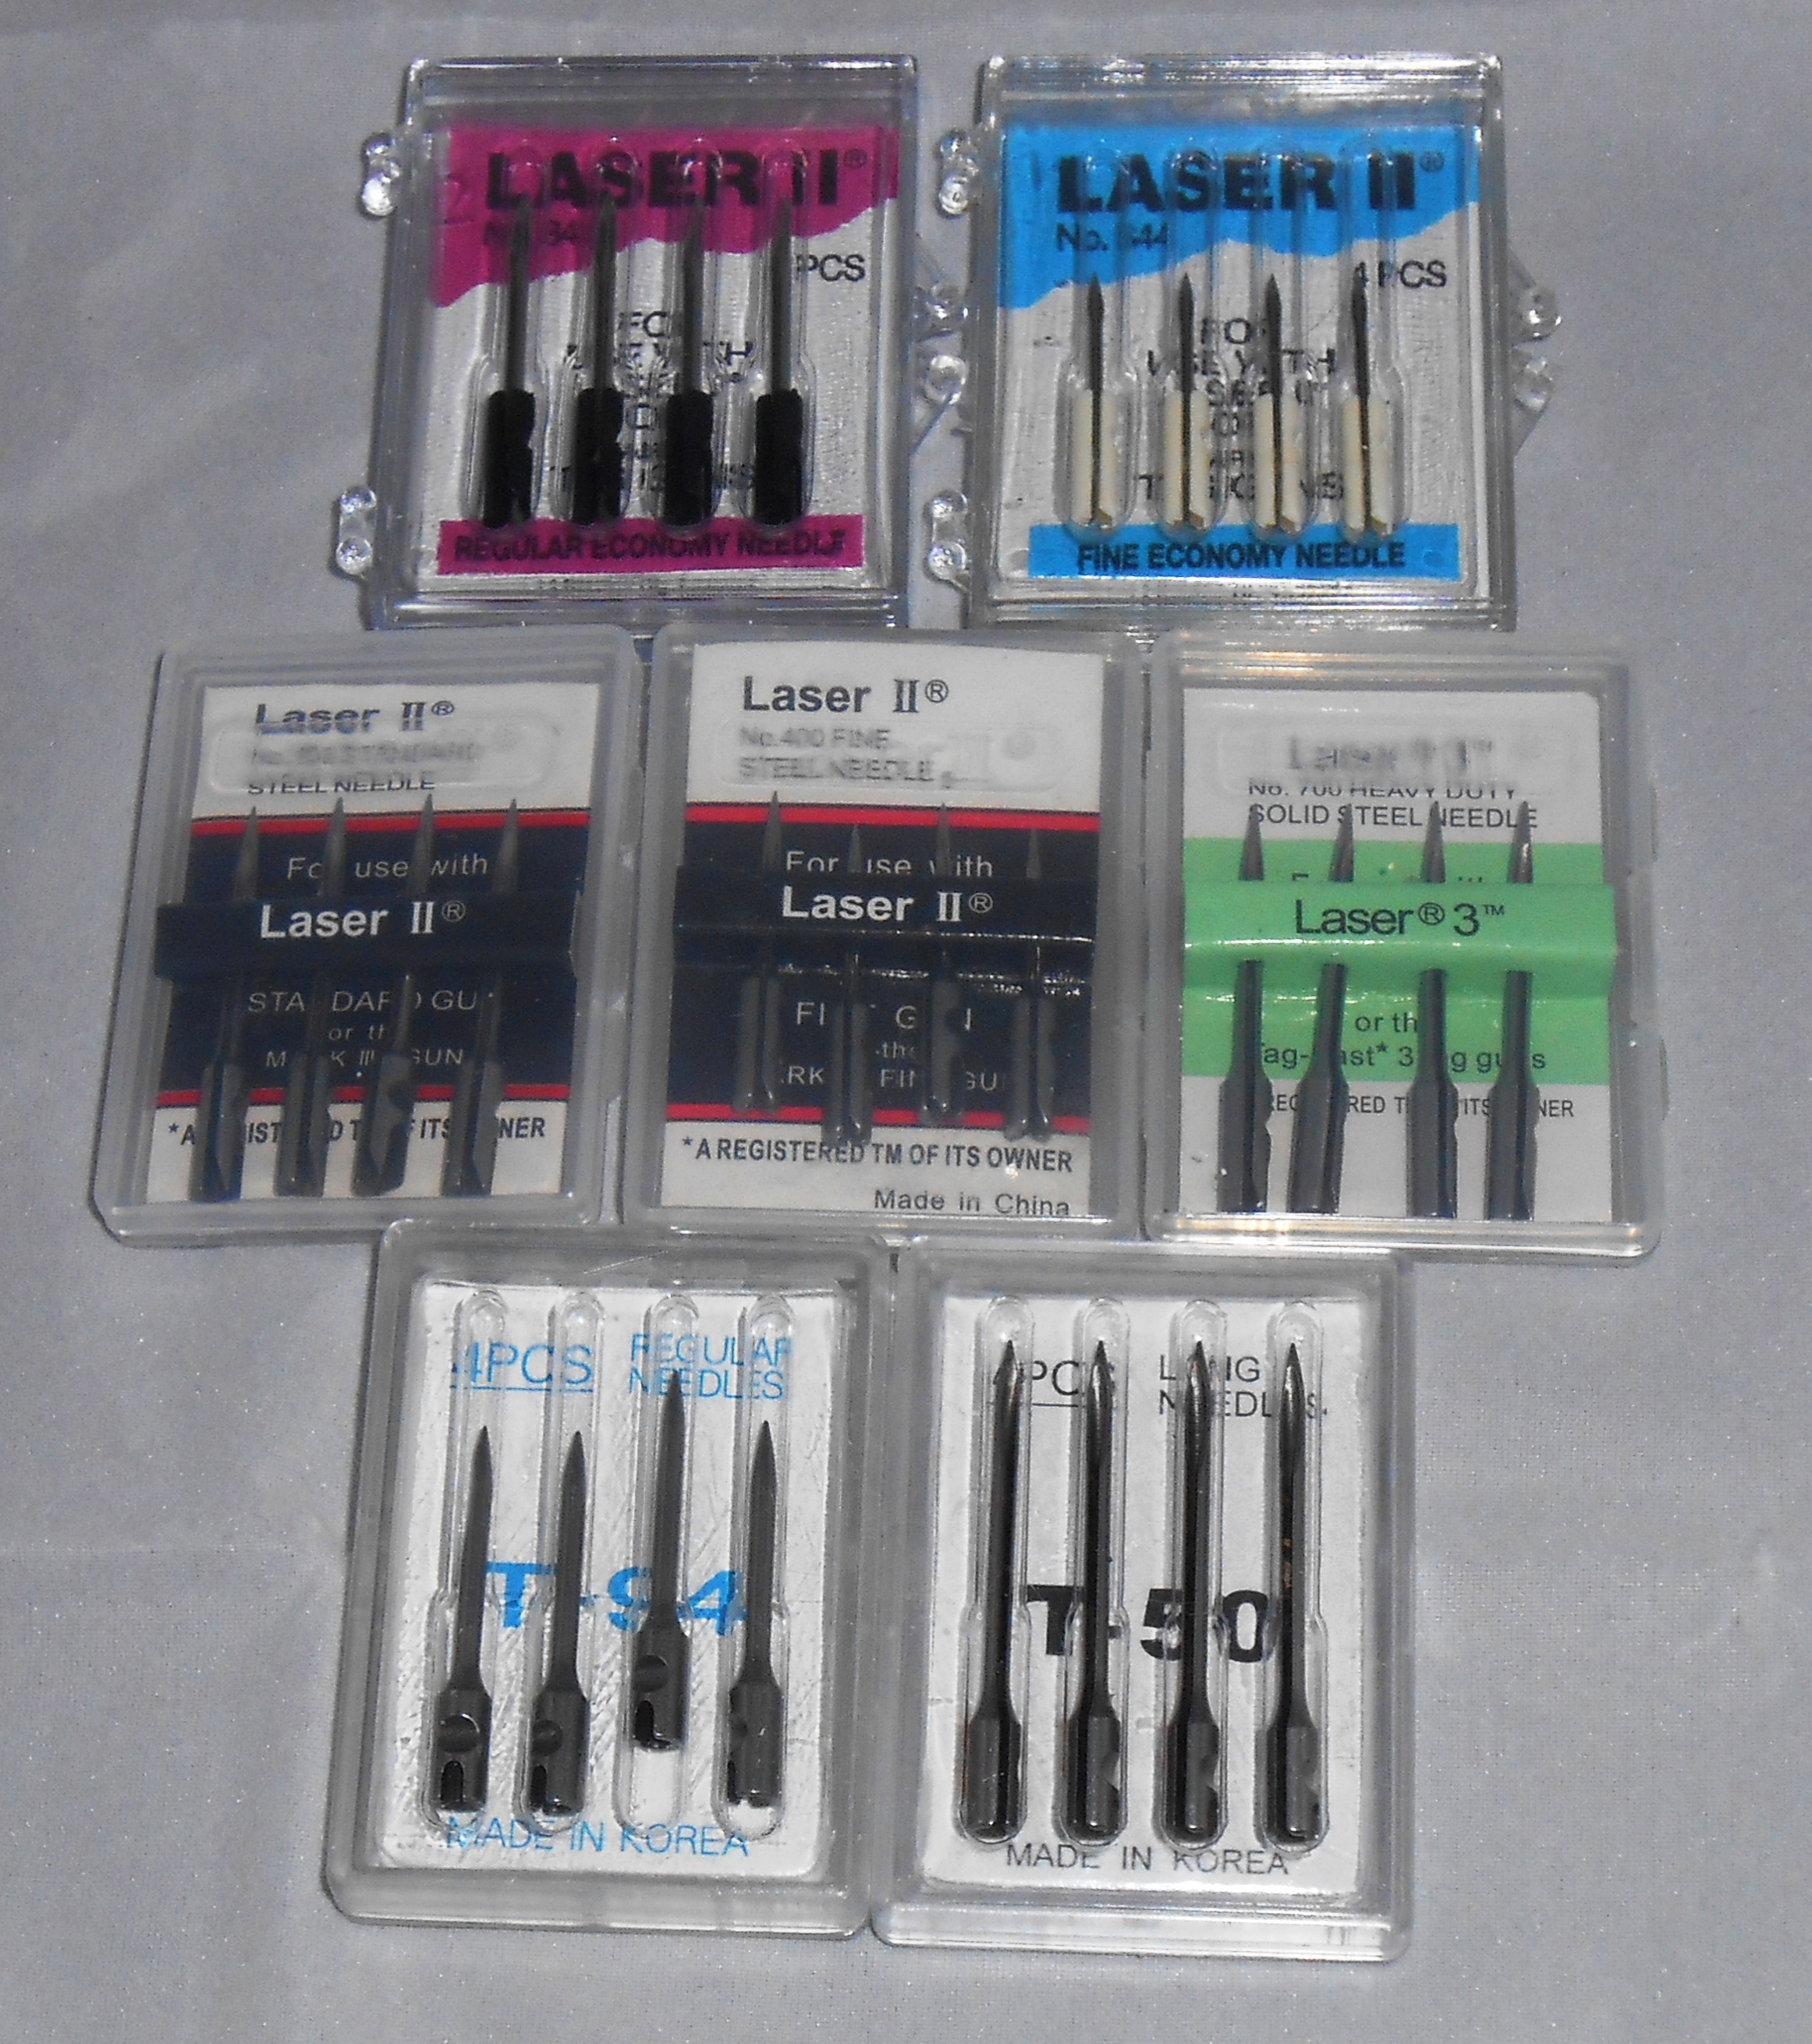 Details about   5Pcs Standard Price Tag Gun Needles For Any Standard Label Price Tag AttacB BK 